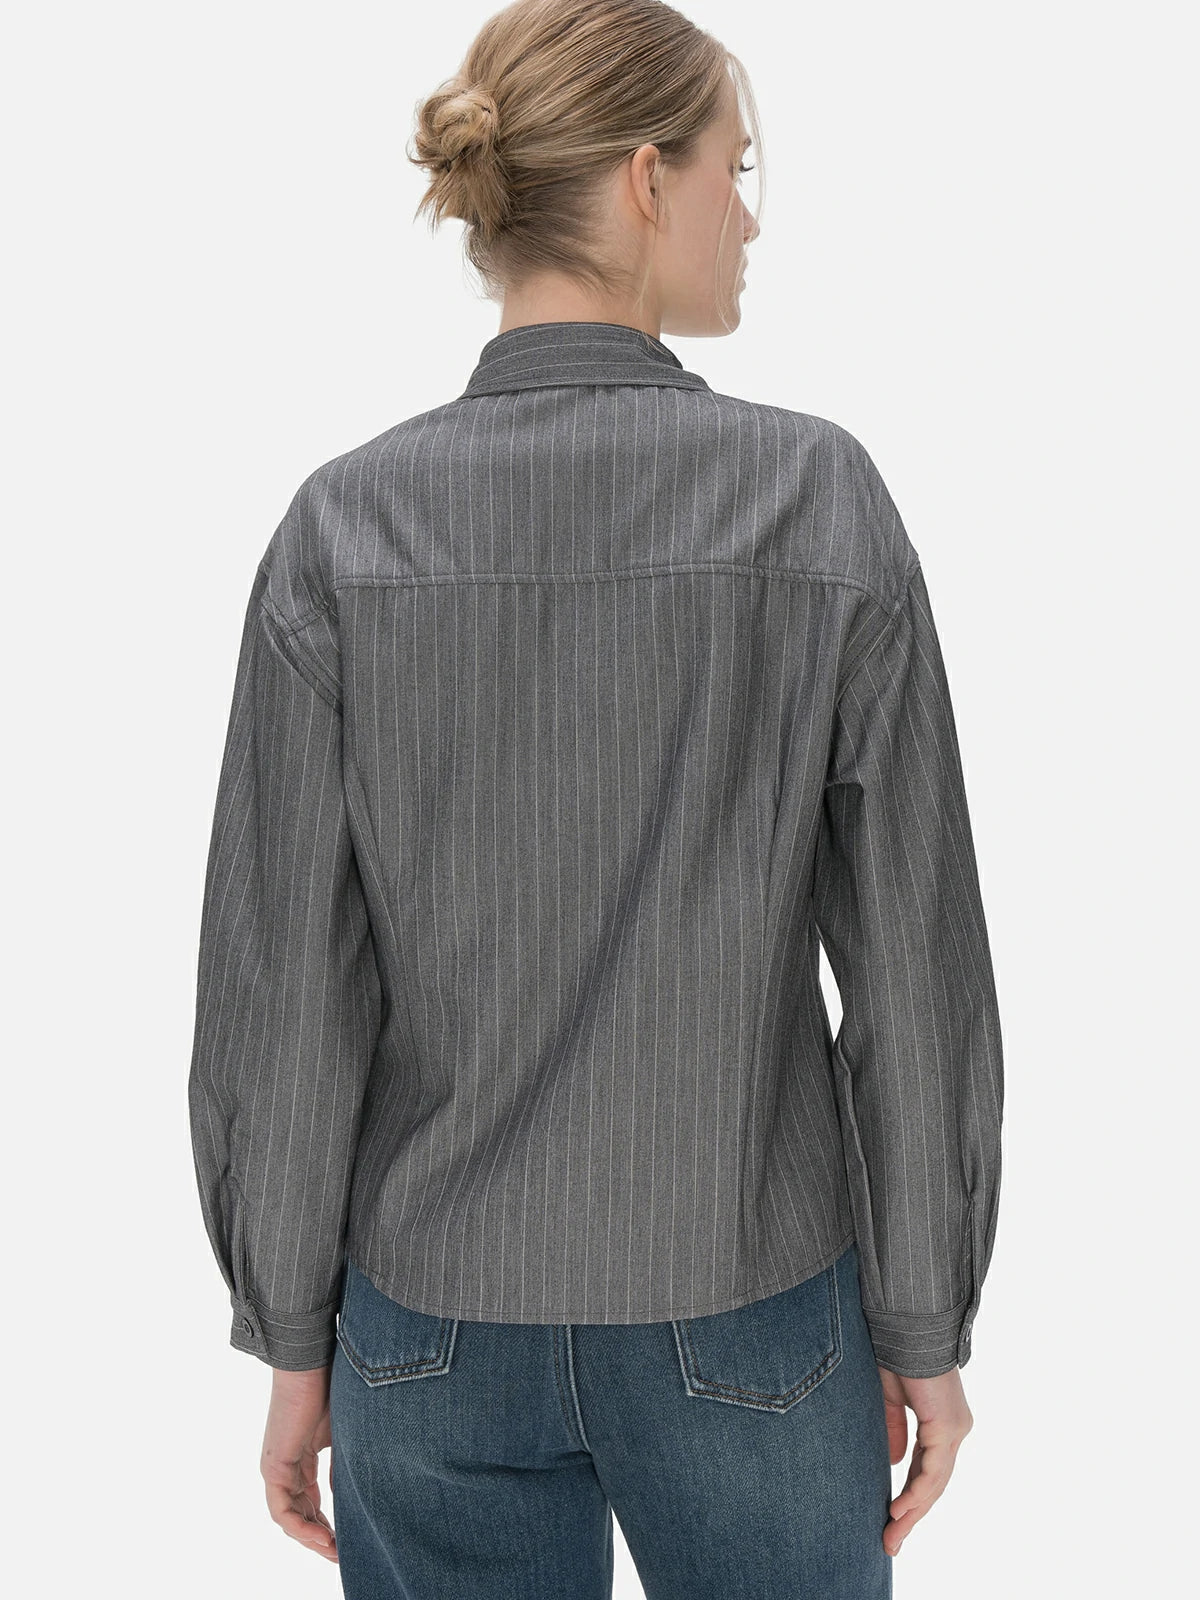 Noble gray vertical stripe shirt with tailored design